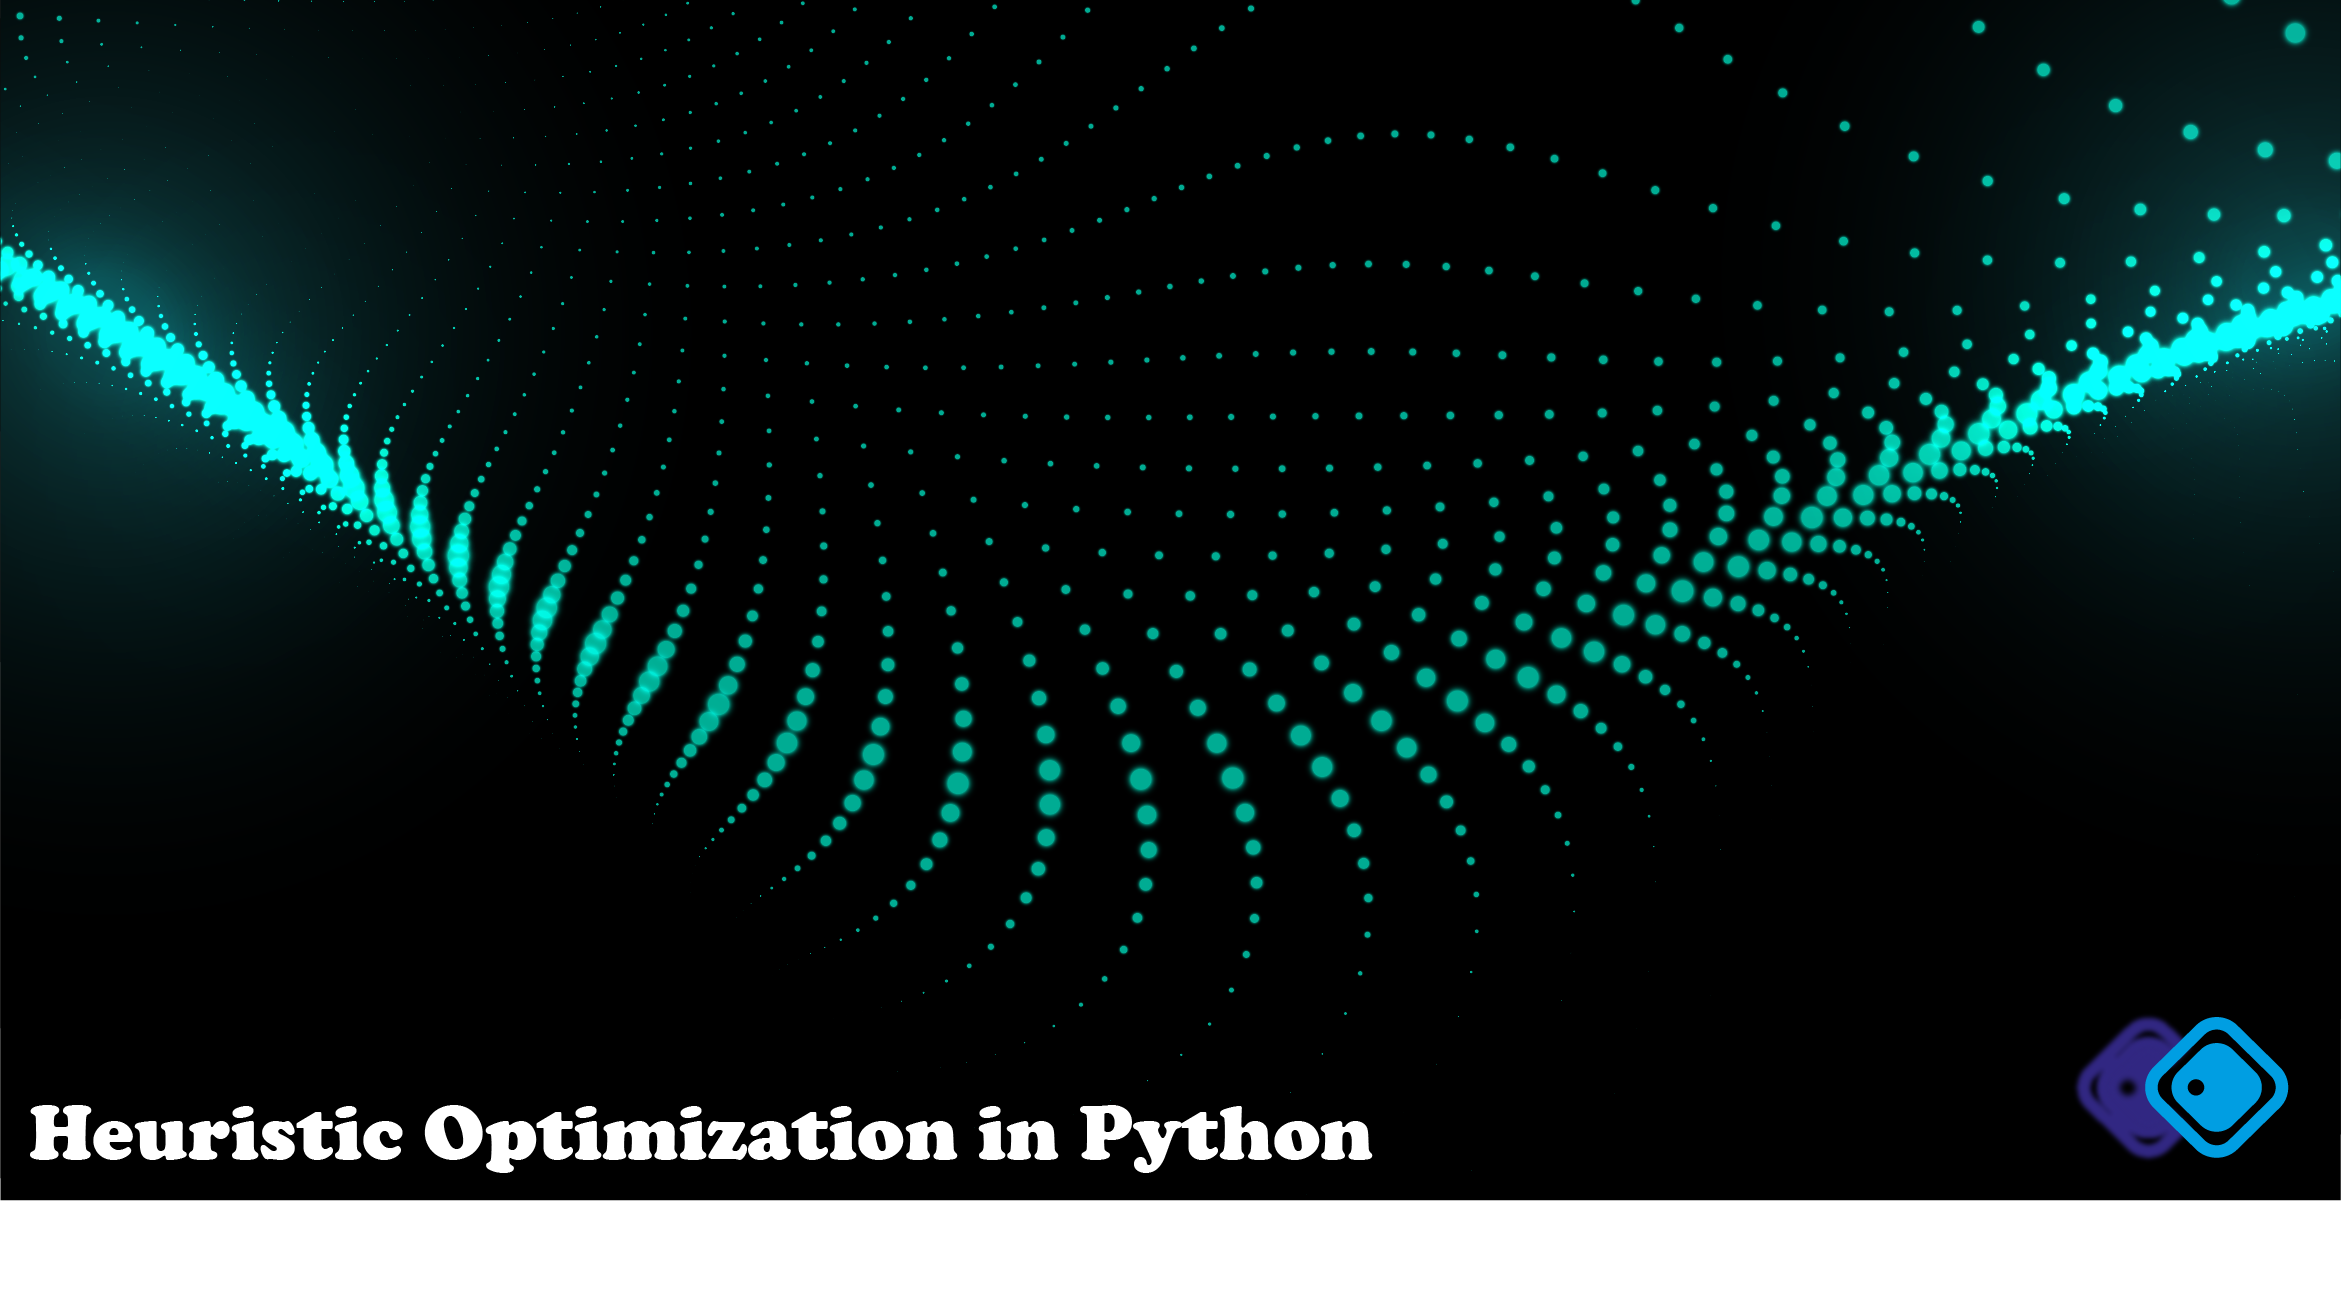 Heuristic Optimization in Python